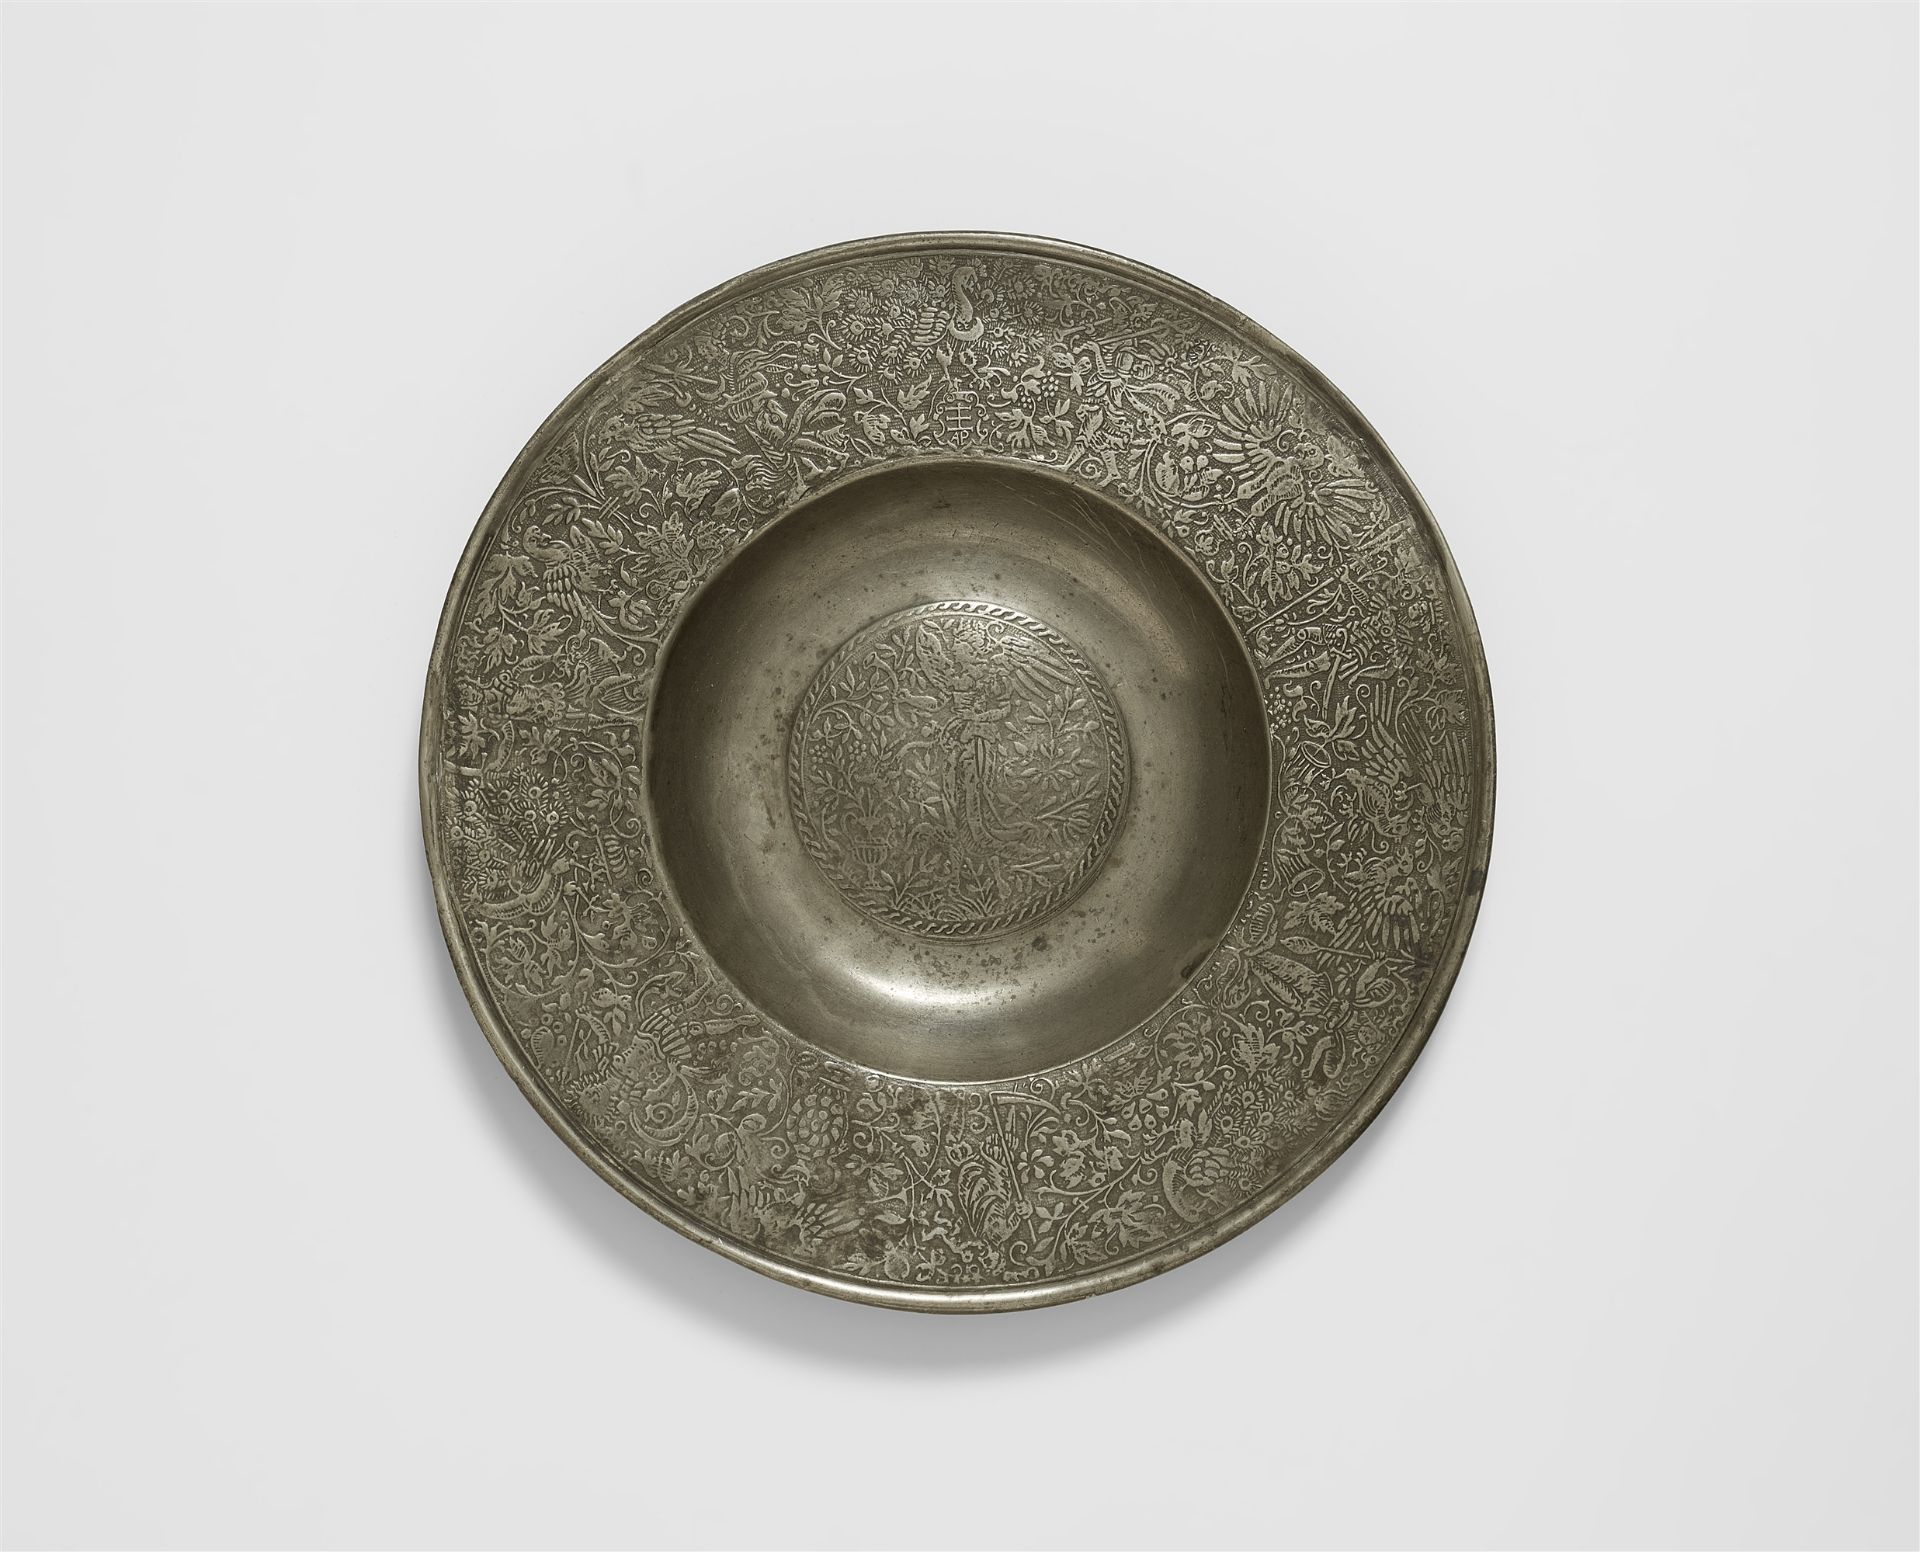 A broad rimmed pewter plate with a figure of Fama